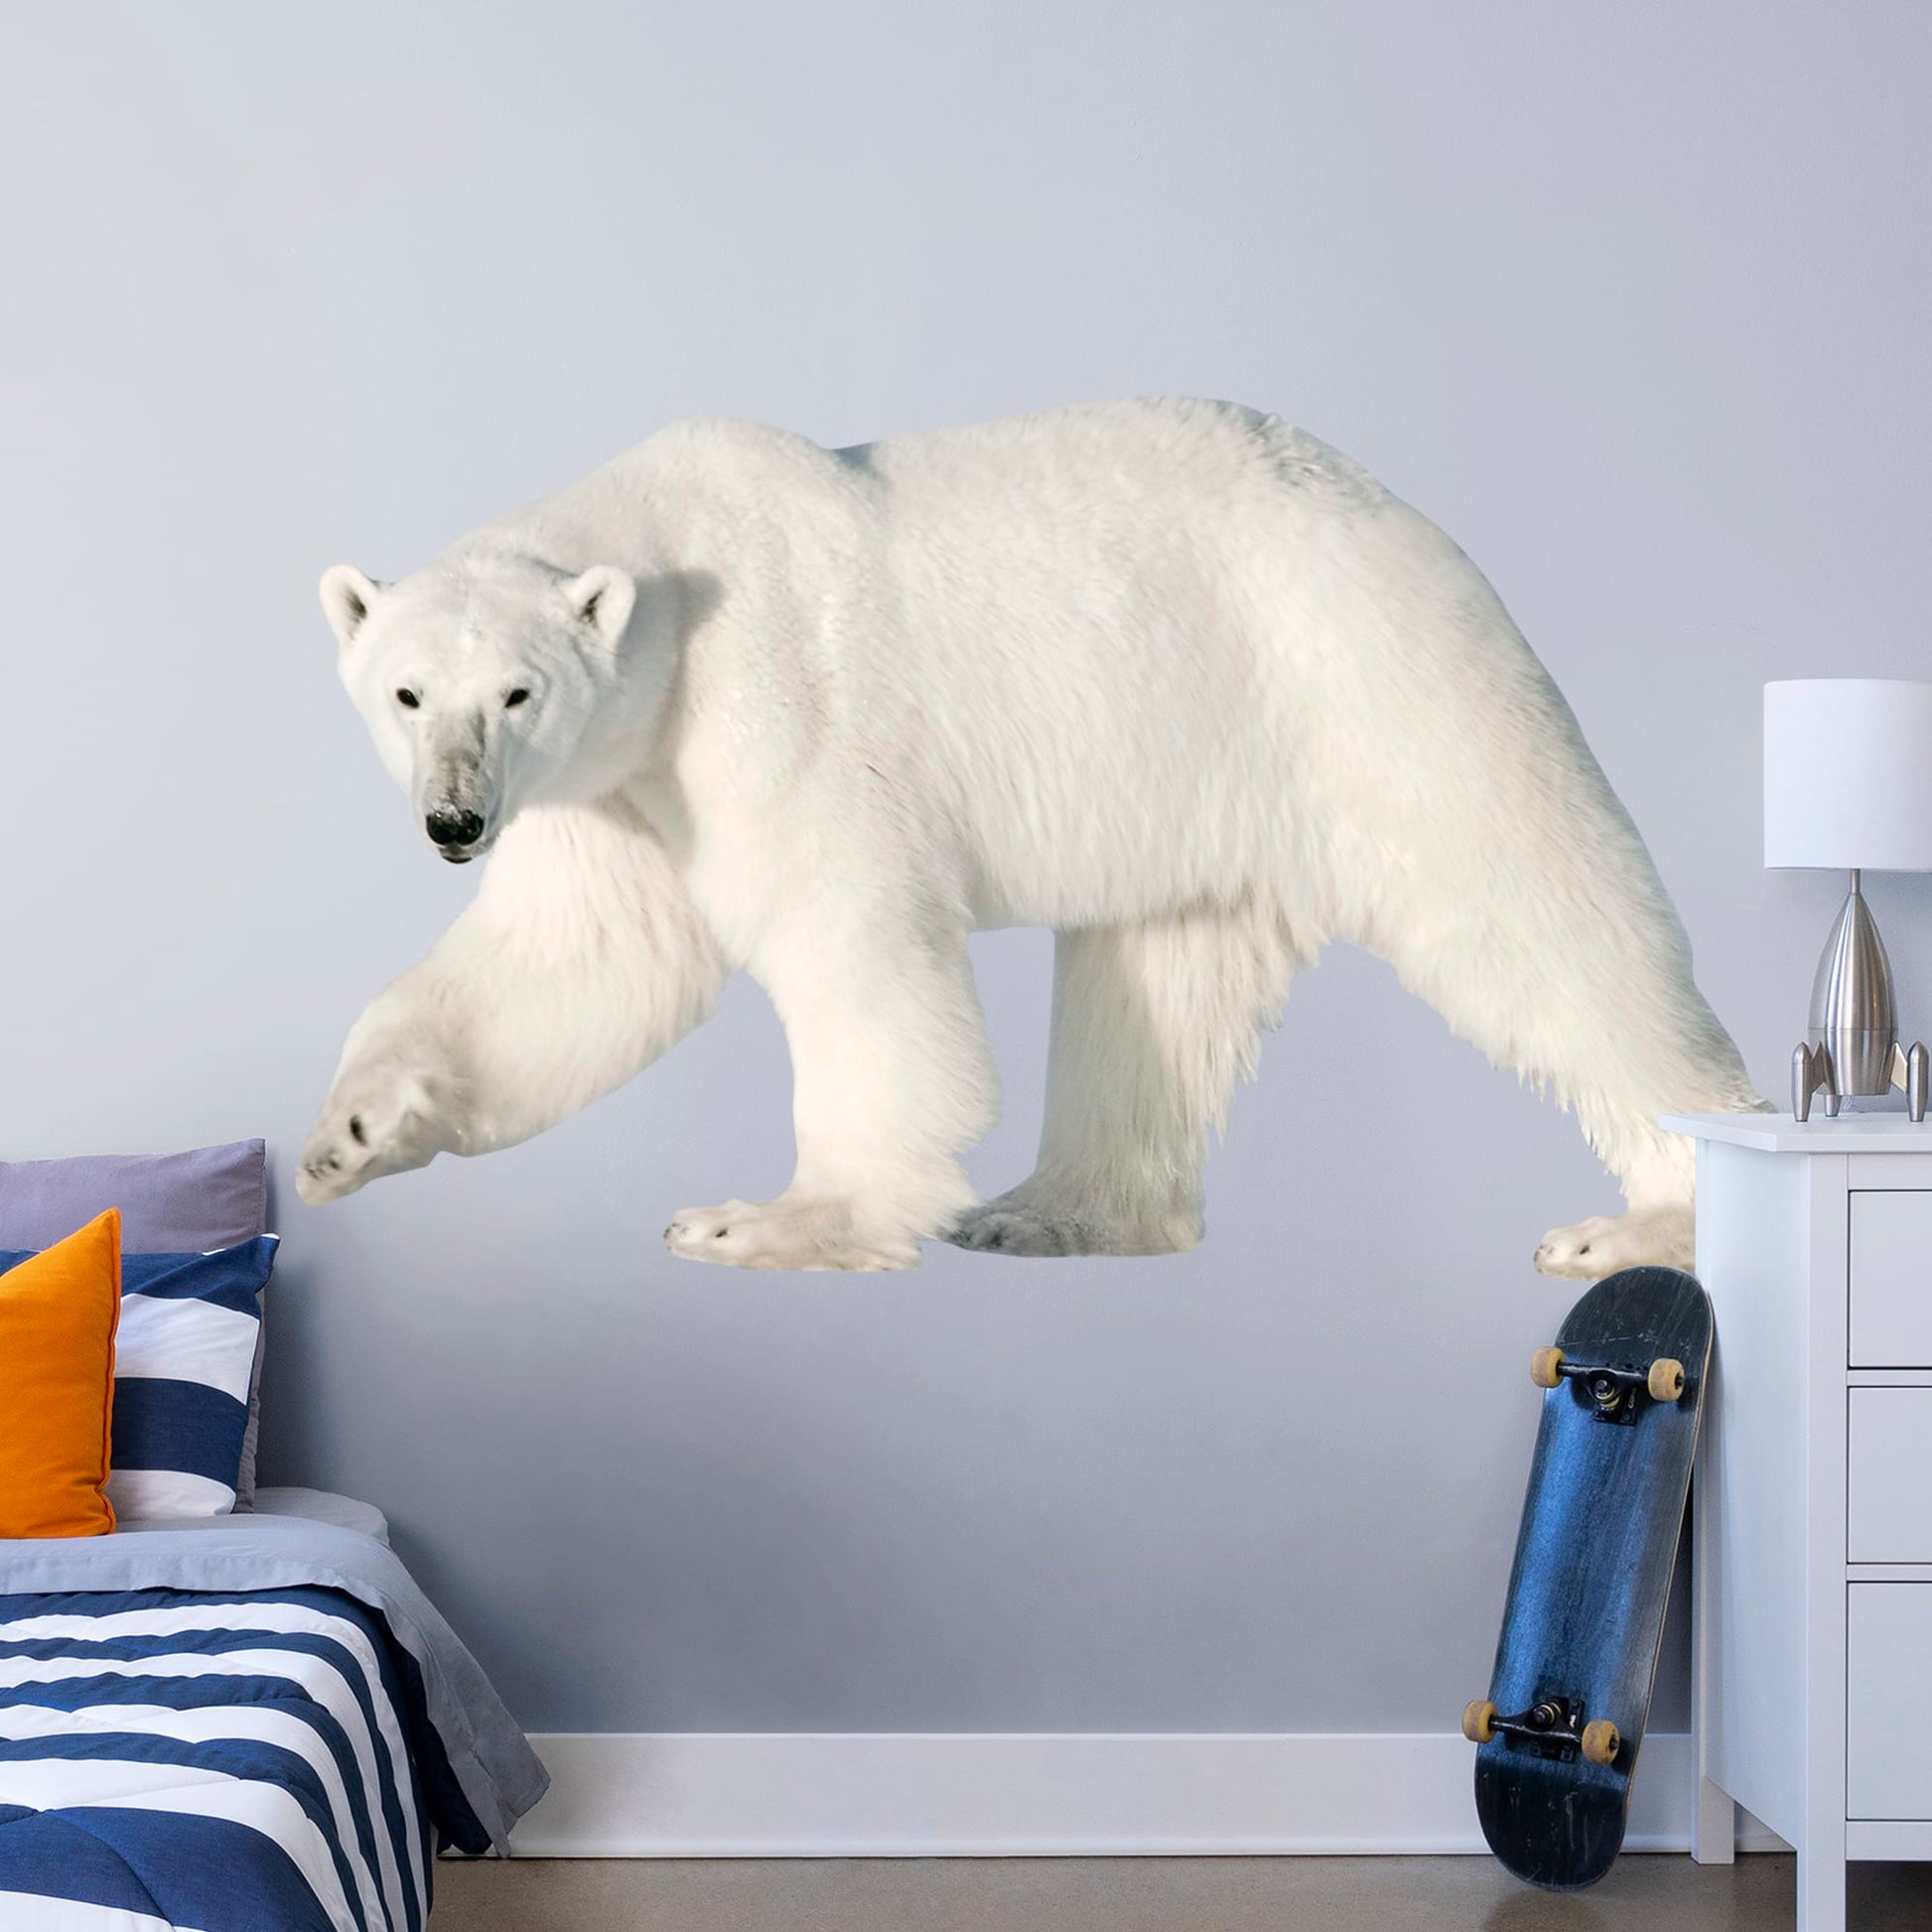 Giant Animal + 2 Decals (51"W x 30"H)